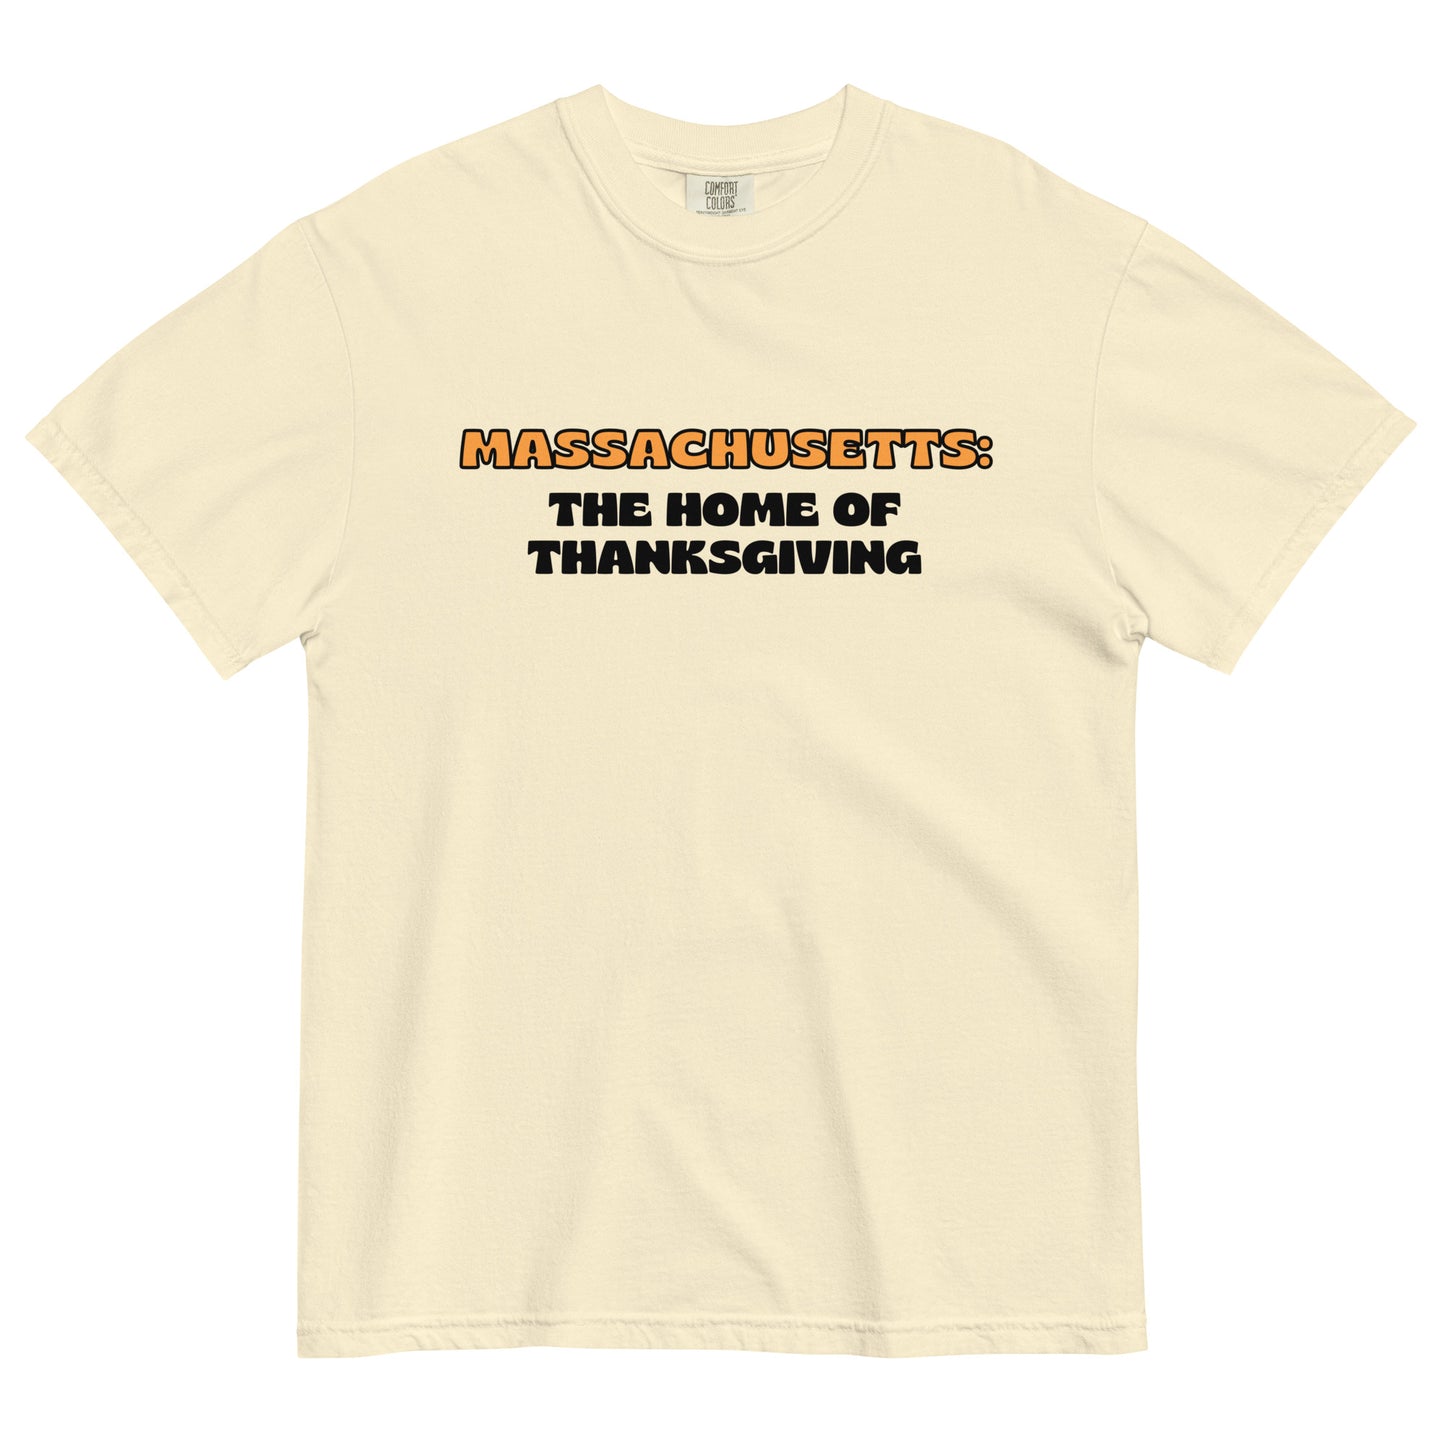 The Home of Thanksgiving T-Shirt